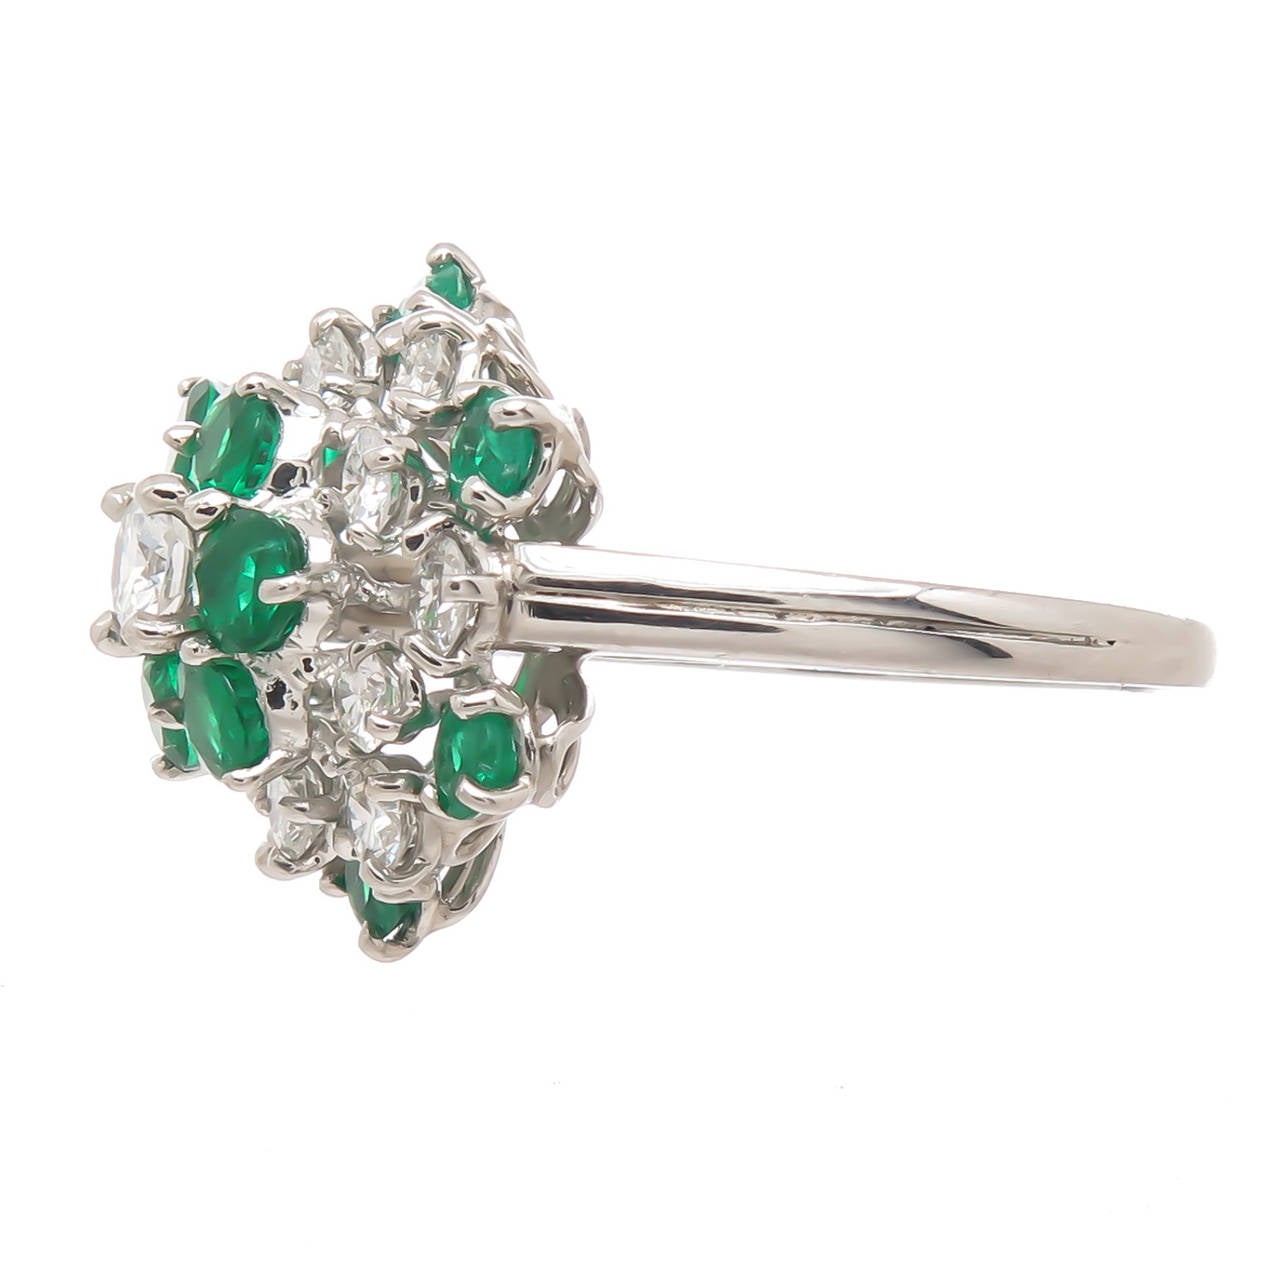 Circa 1990 Platinum, Diamond and Emerald Ring by Oscar Heyman, Set with Very fine round Gem color Emeralds and alternating with Round Brilliant cut Diamonds totaling 1 Carat. measuring 1/2 inch in diameter, finger size = 6